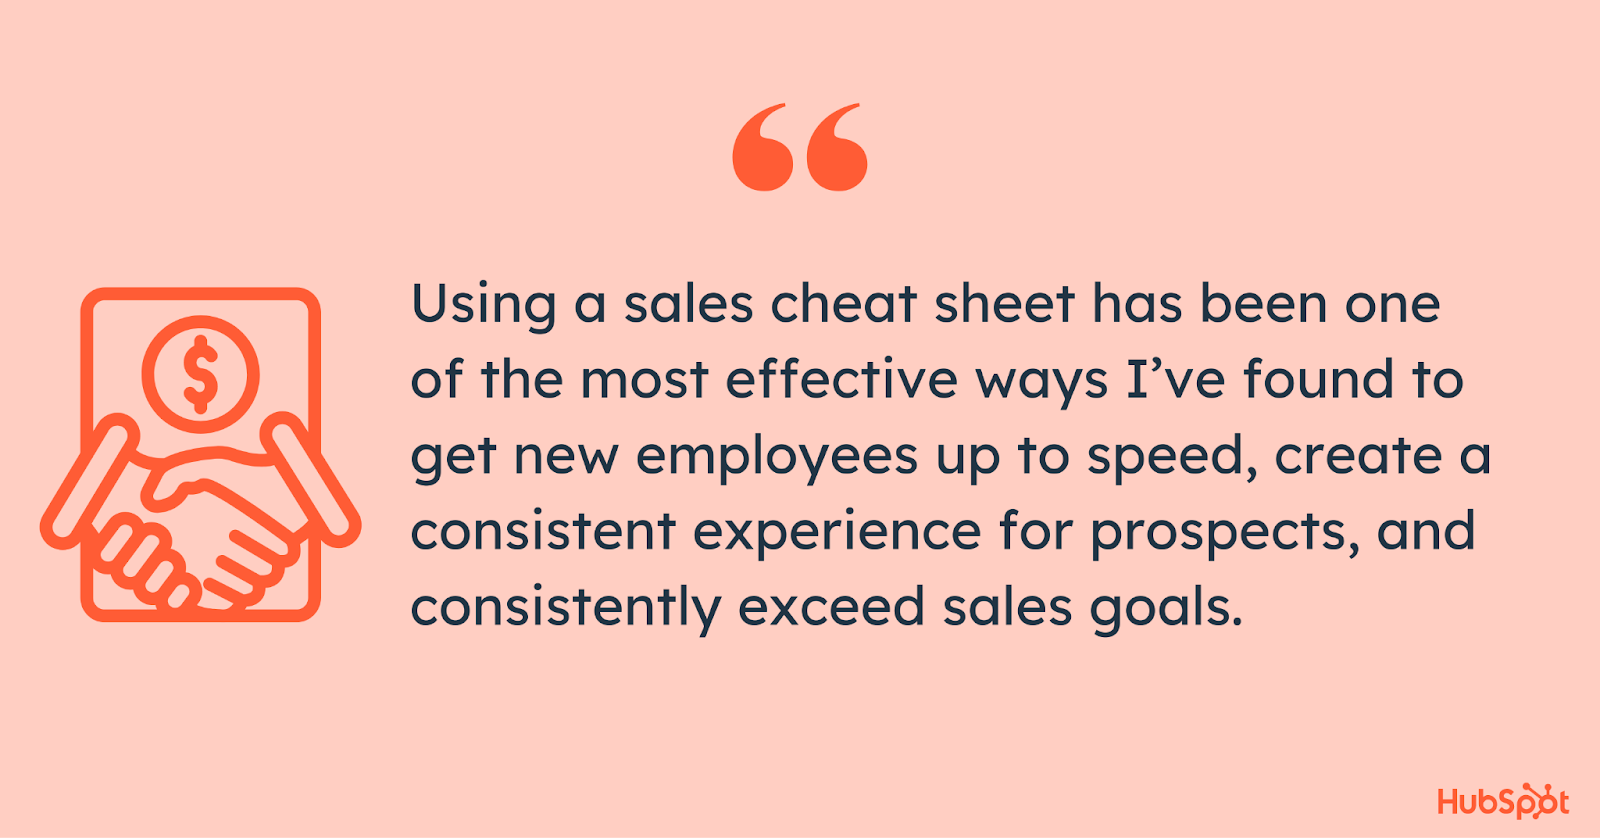 Quote about value of using sales cheat sheet